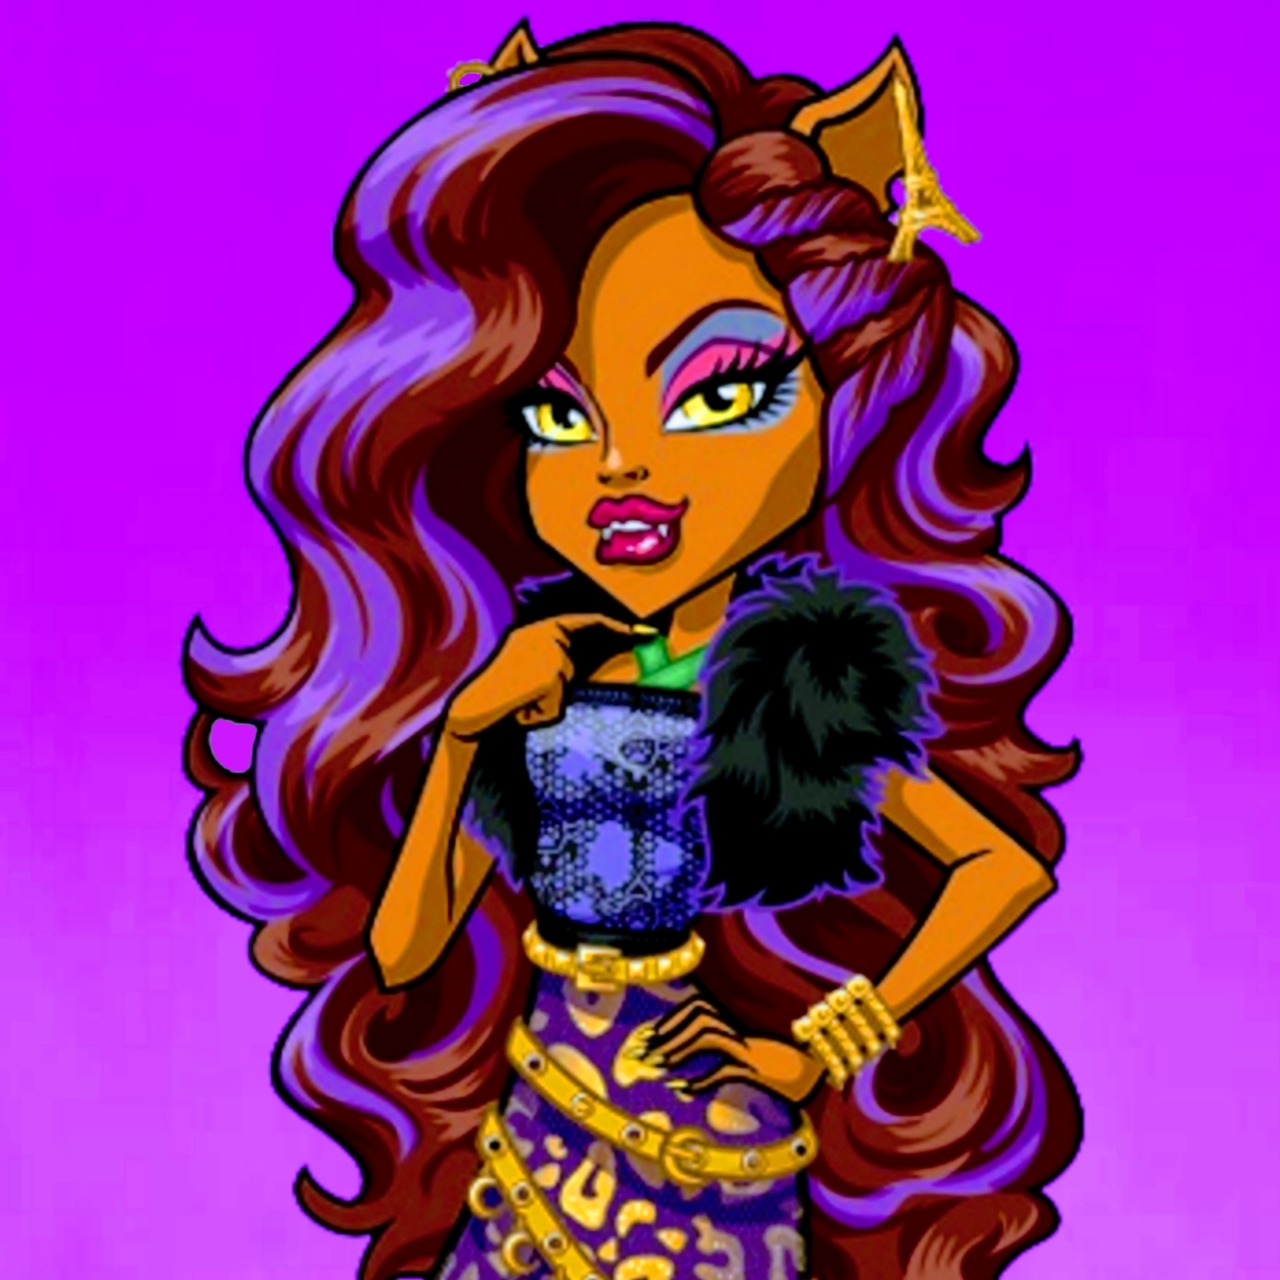 Monster High Icons (Close-up)Like and/or reblog if you save/use #monster high #scaris: city of frights #clawdeen wolf#frankie stein#draculaura#sparkly#glitter#close-up#icons#square icons #icons by me